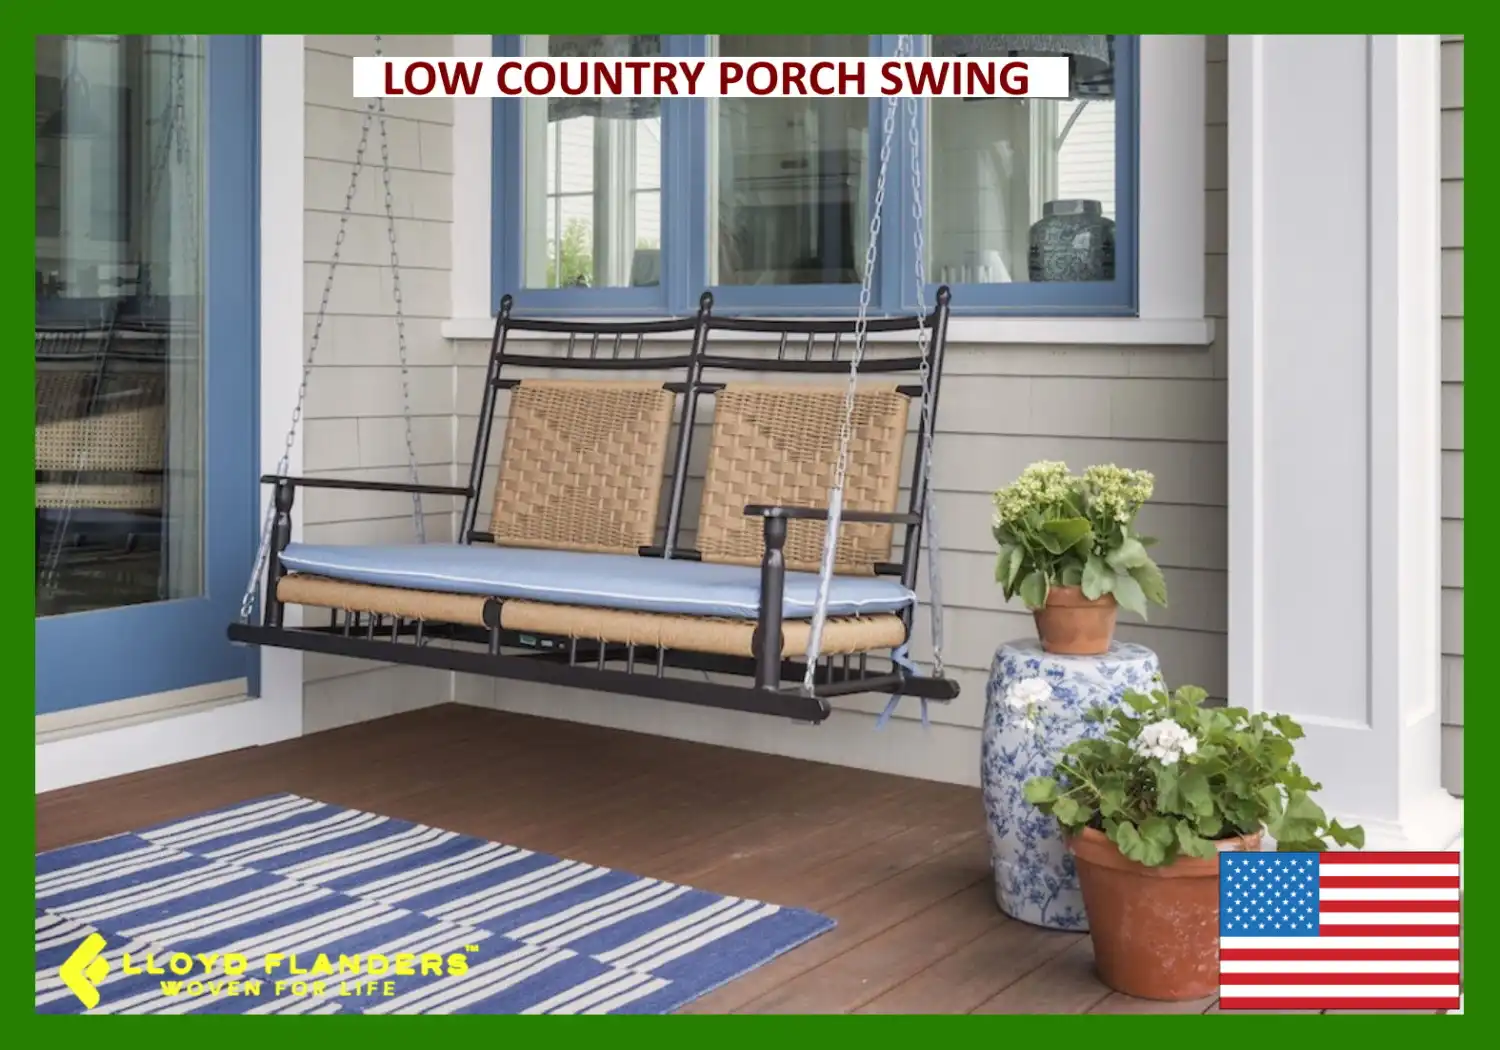 LOW COUNTRY PORCH SWING